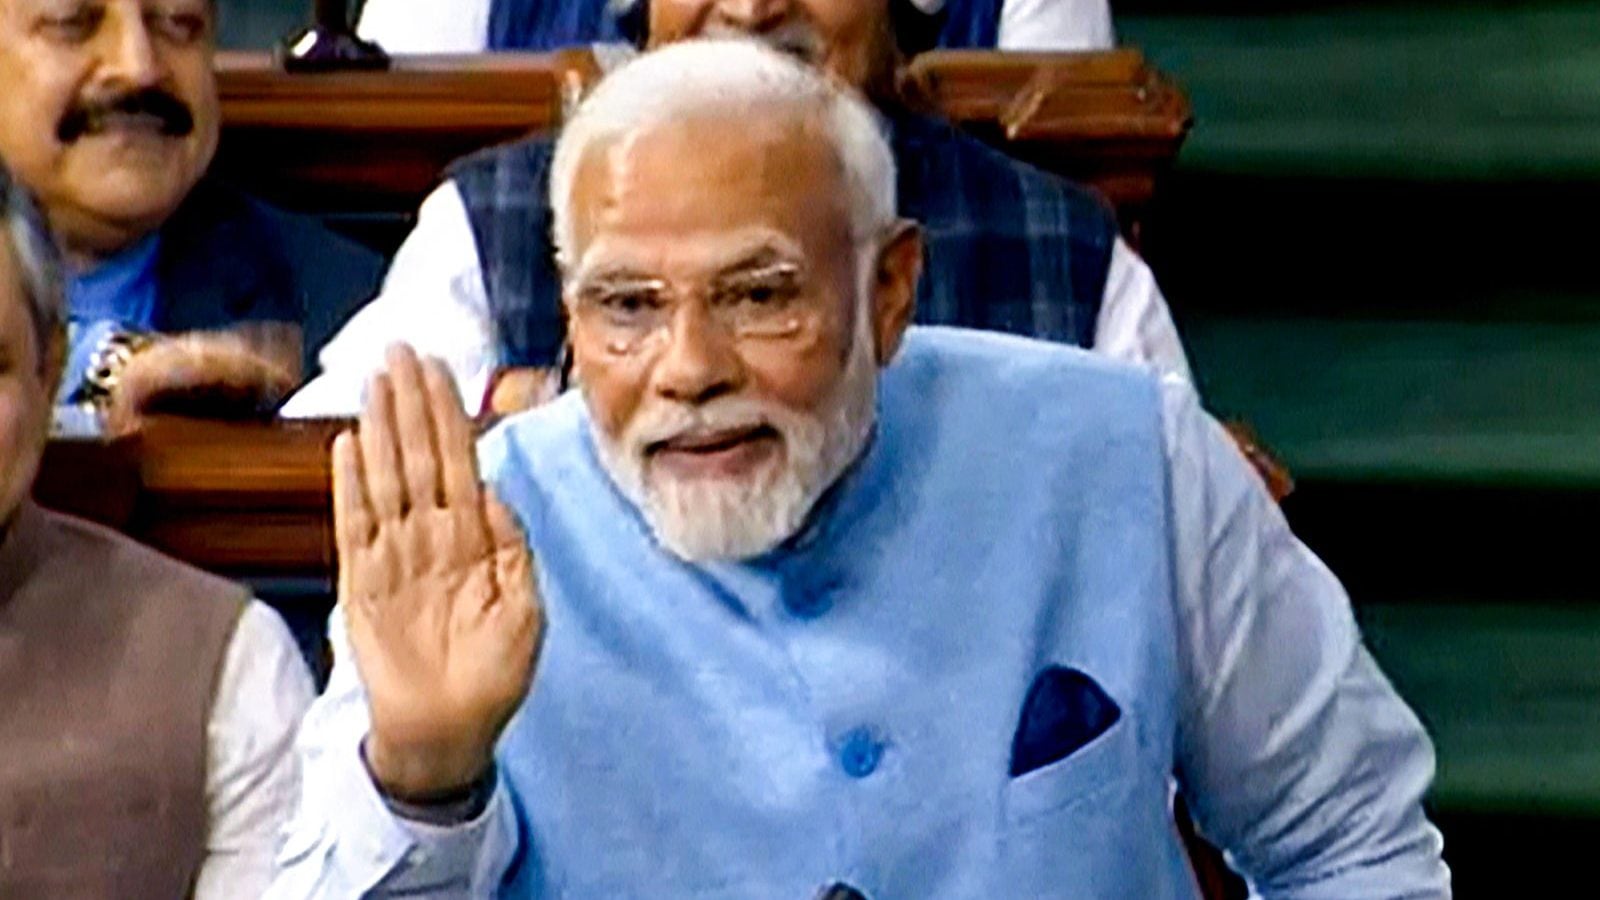 Lies and allegations of certain leaders cannot pierce suraksha kavach of belief of crores of Indians: PM in Parliament